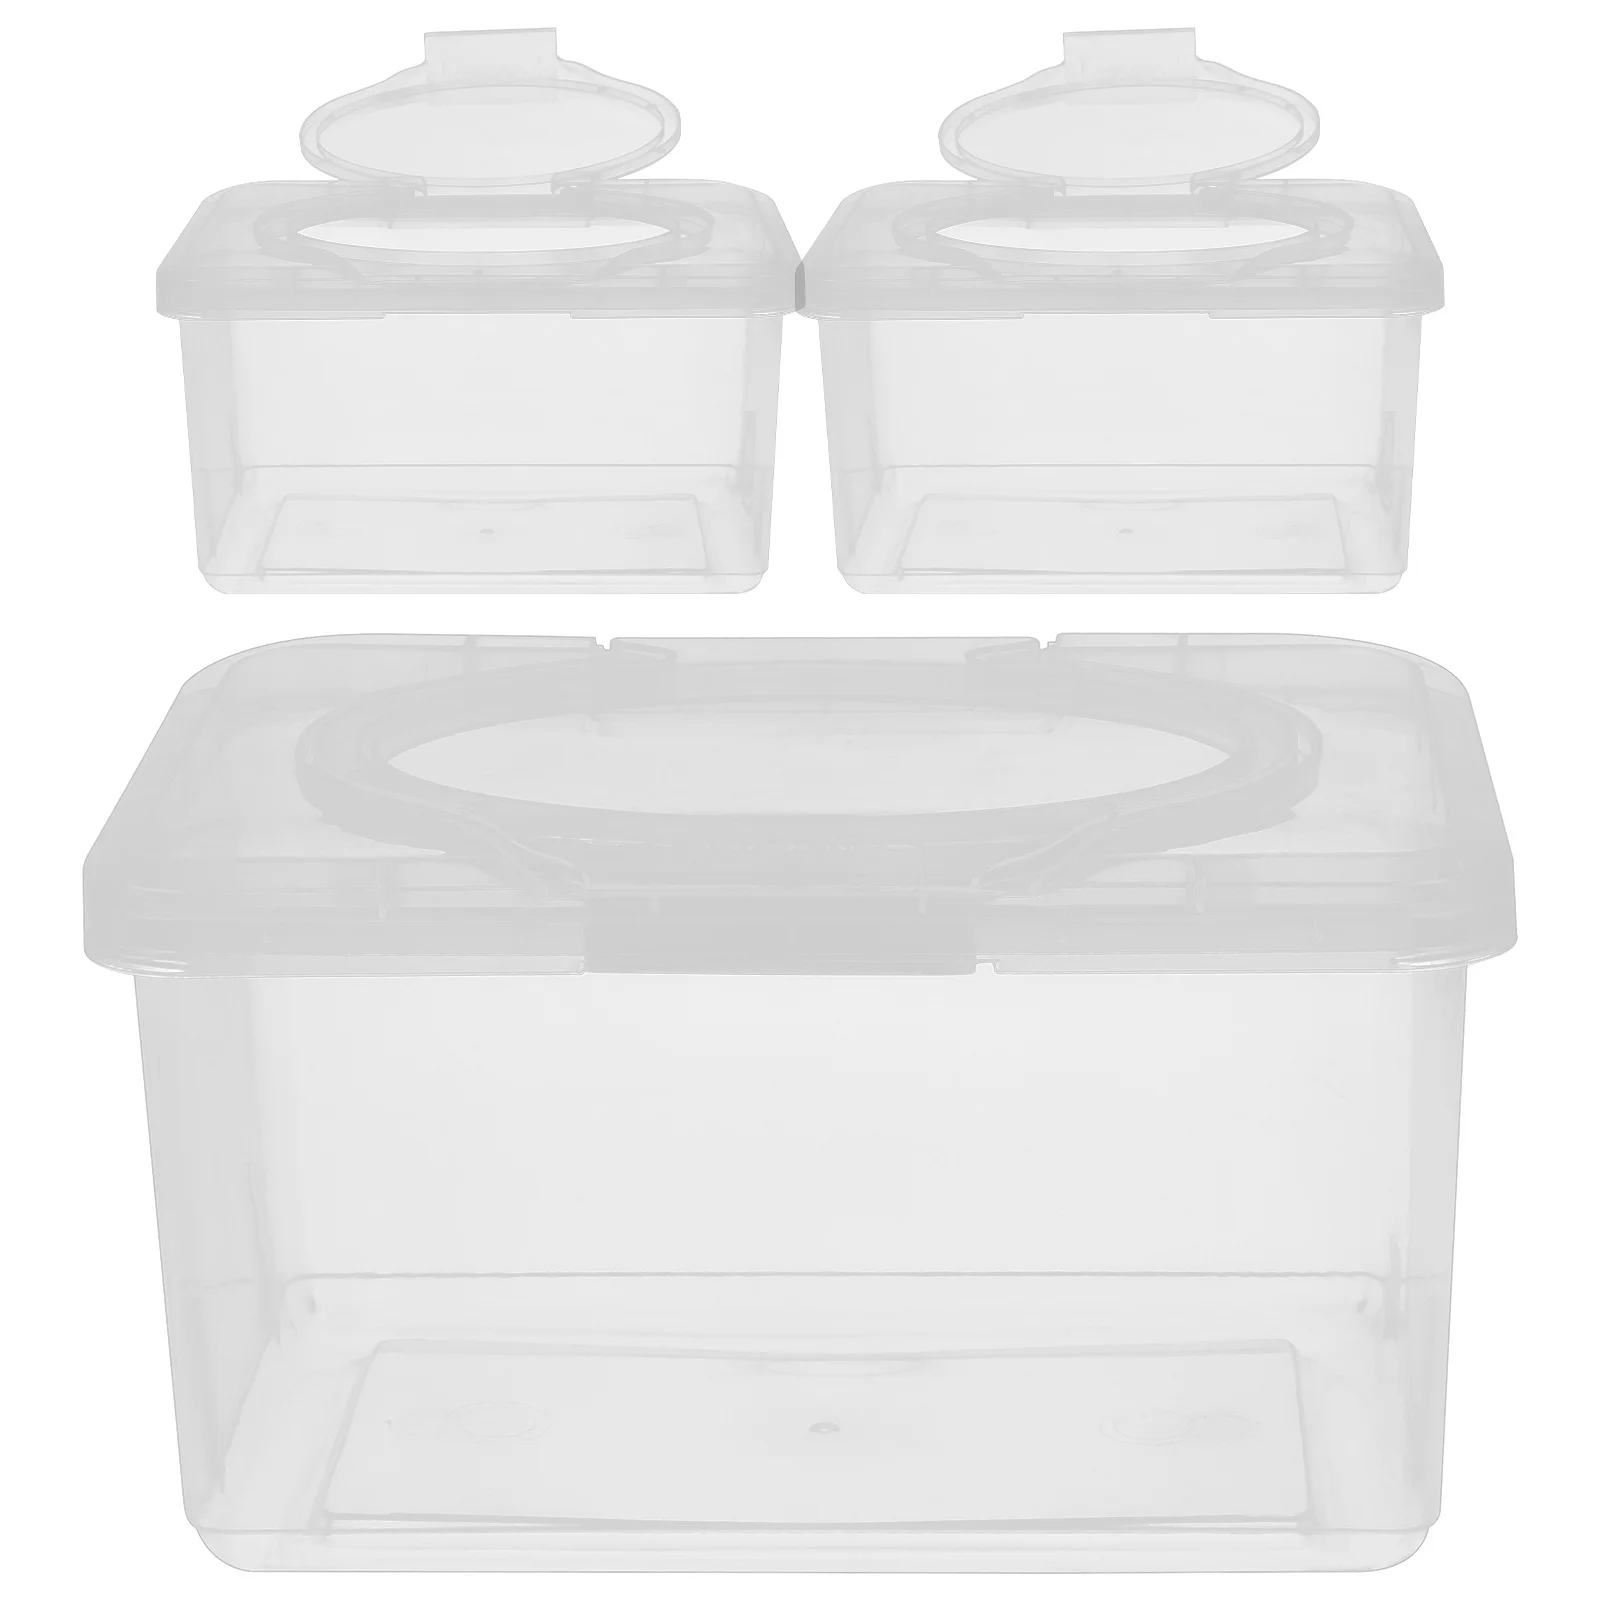 

3 Pcs Clear Plastic Containers Baby Wipes Box Portable Dispensers Small Tissue Case Holder Storage Wet Travel Warmer